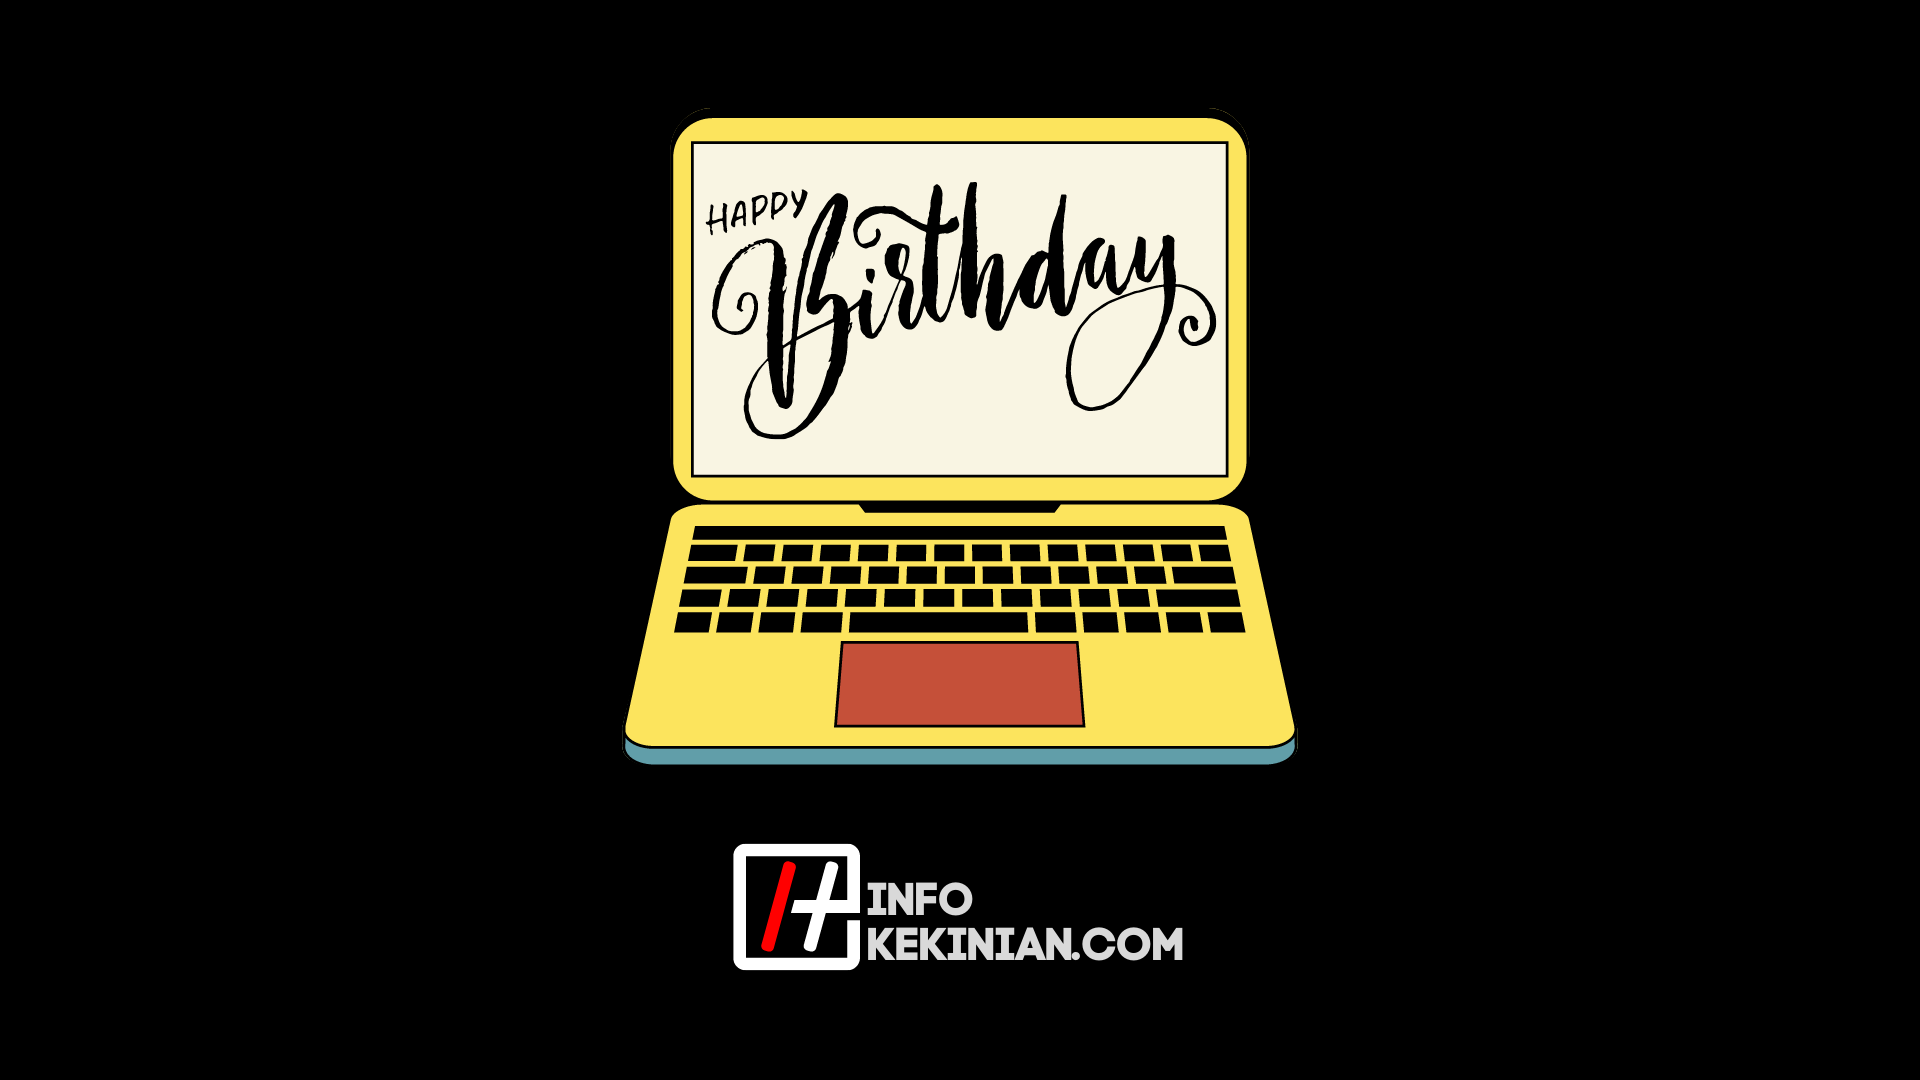 How to make birthday greetings on the site